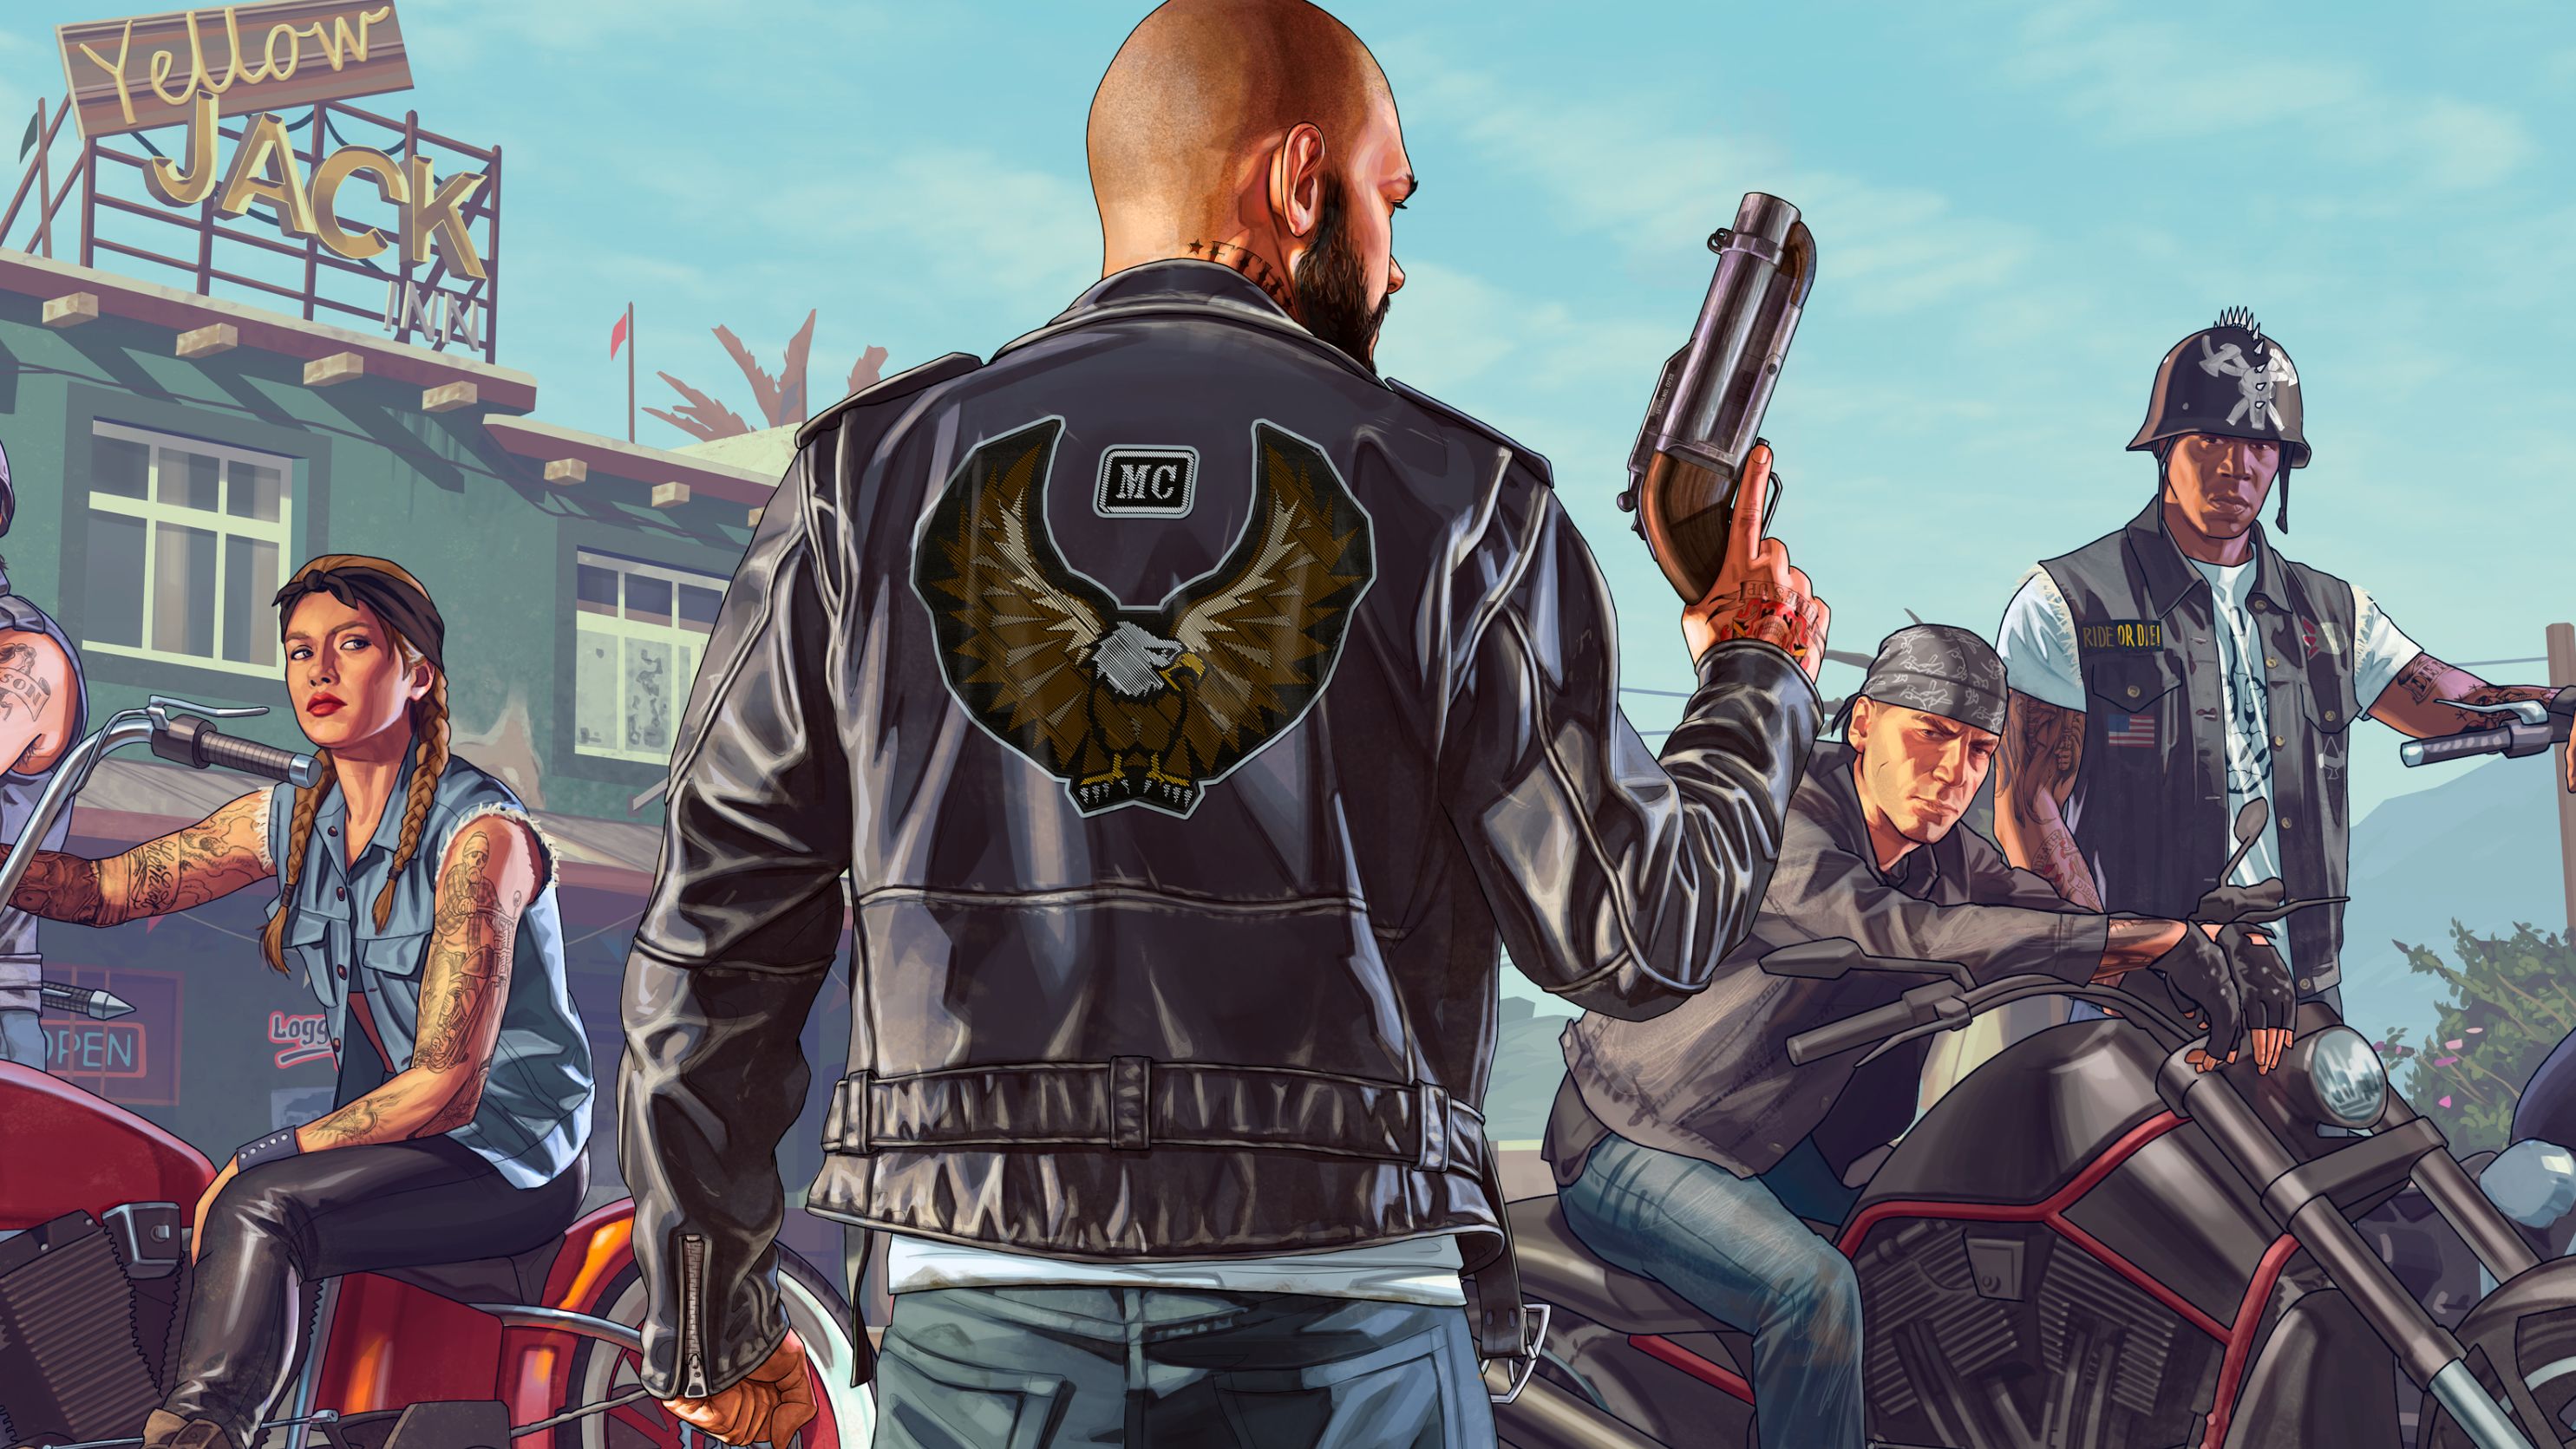 GTA Online bug exploited to ban, corrupt players' accounts